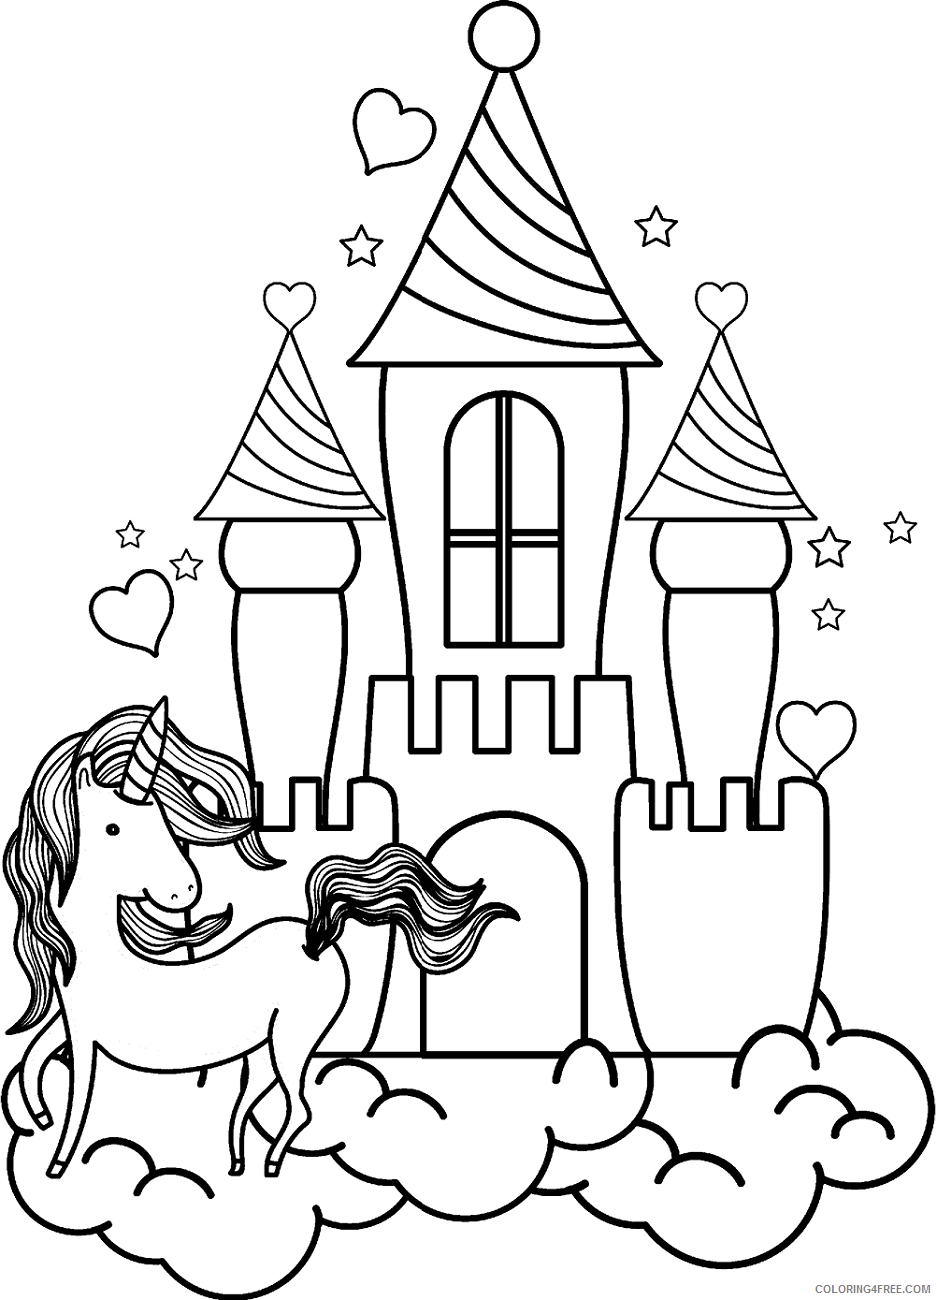 Unicorn Coloring Pages unicorn_and_the_castle Printable 2021 6053 Coloring4free